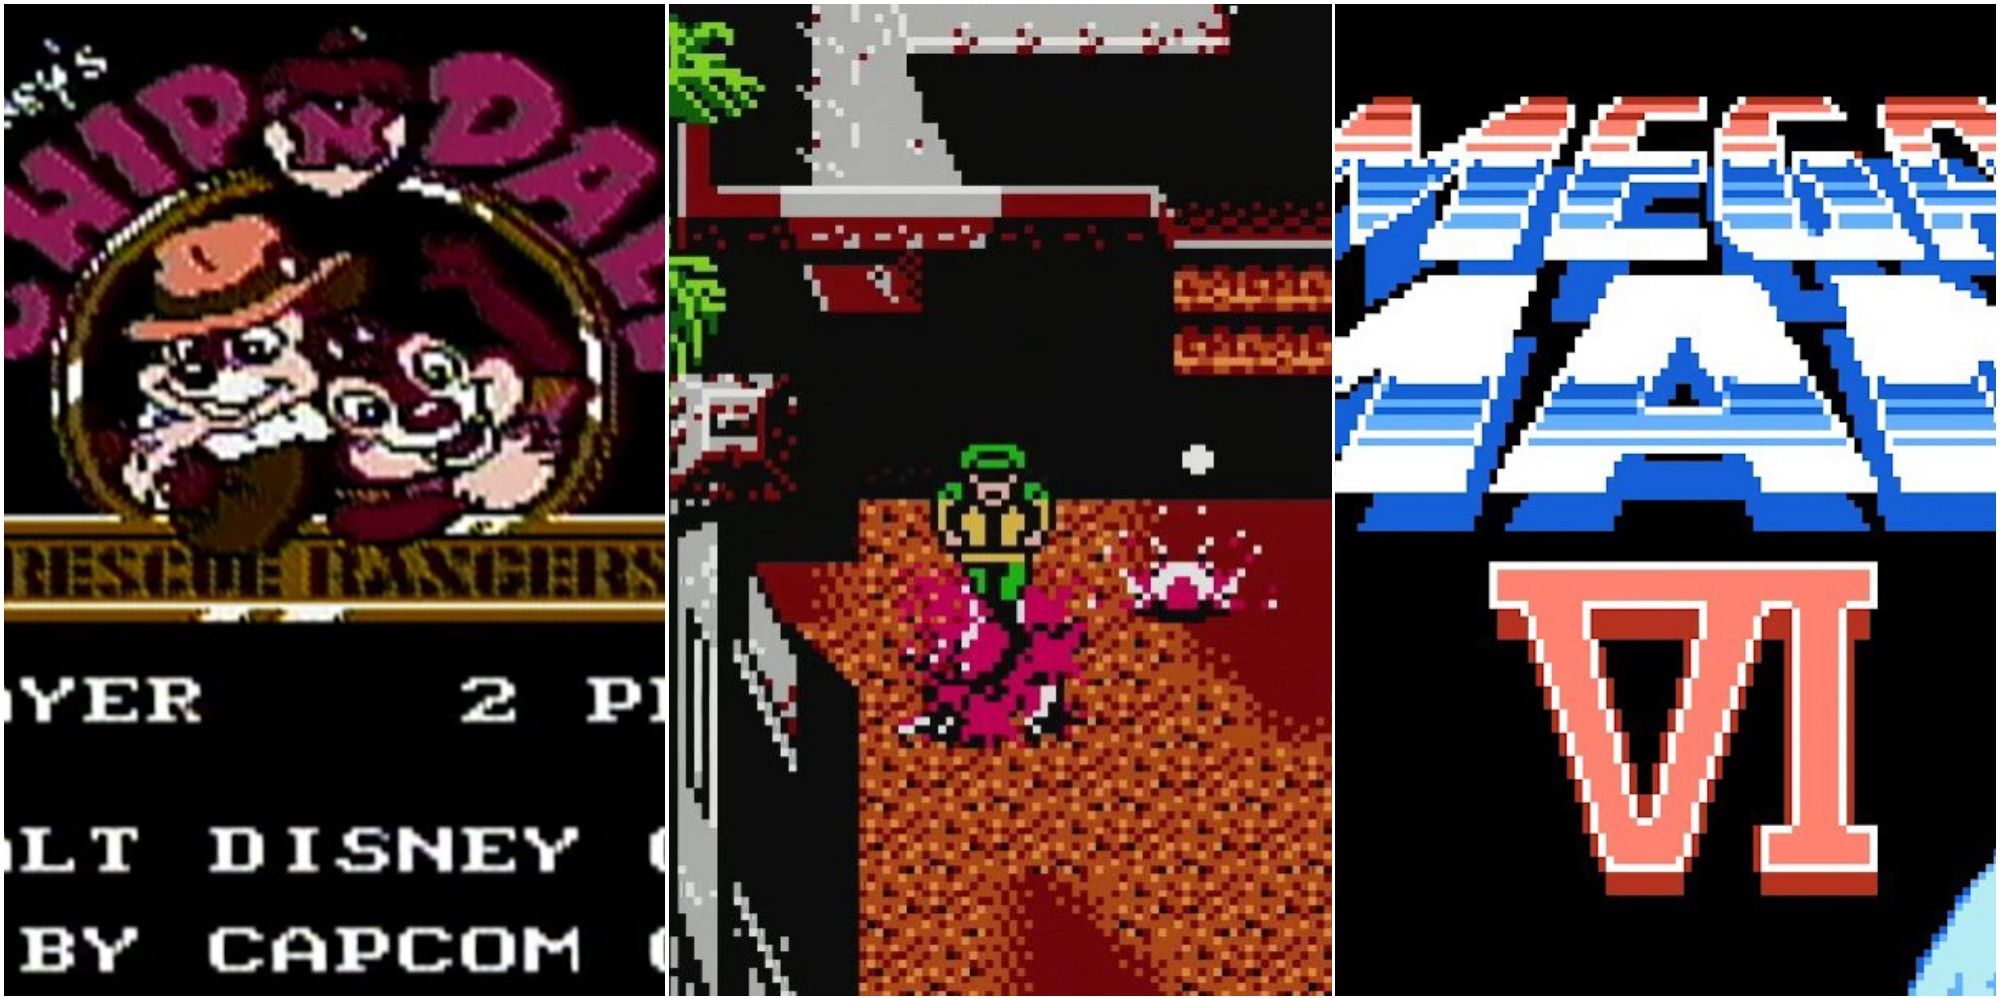 Easiest NES Games feature with Mega Man 6, Chip n Dale, and Guerrilla War